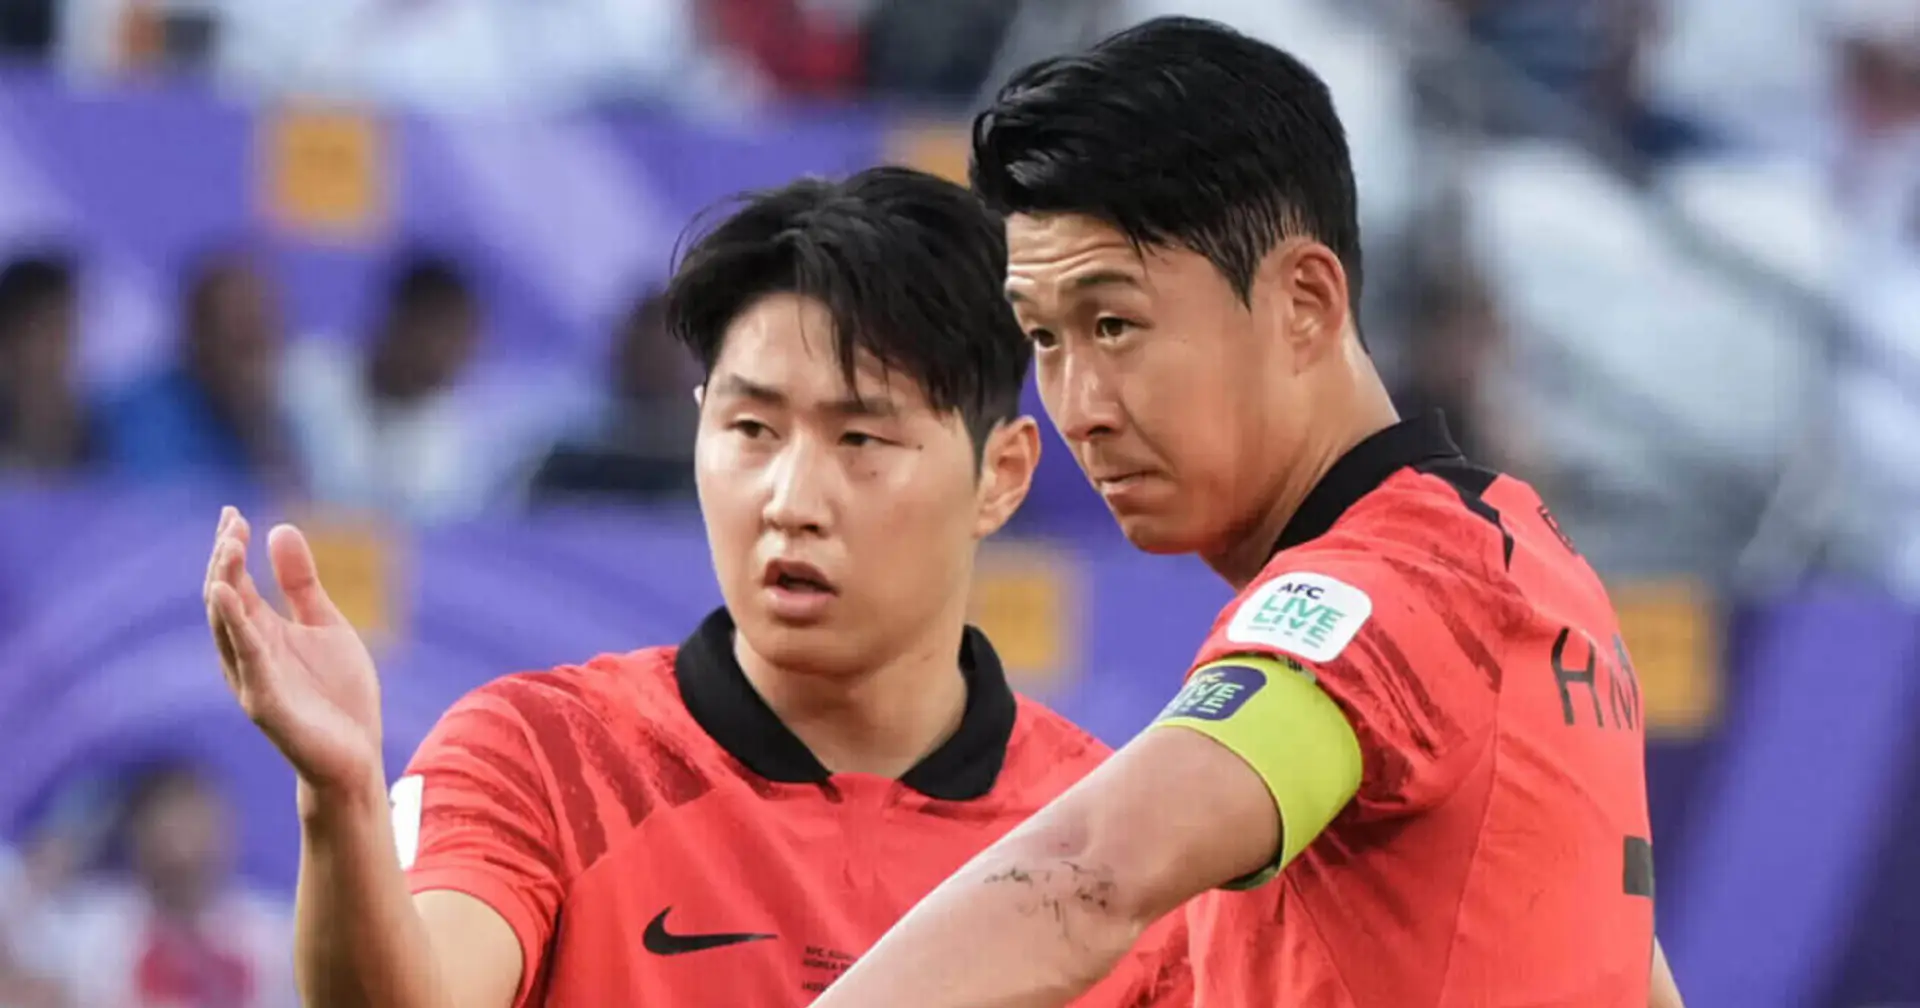 Son Heung-min's teammate could face almost £600,000 lawsuit in damages from advertisers after fight with Spurs star 